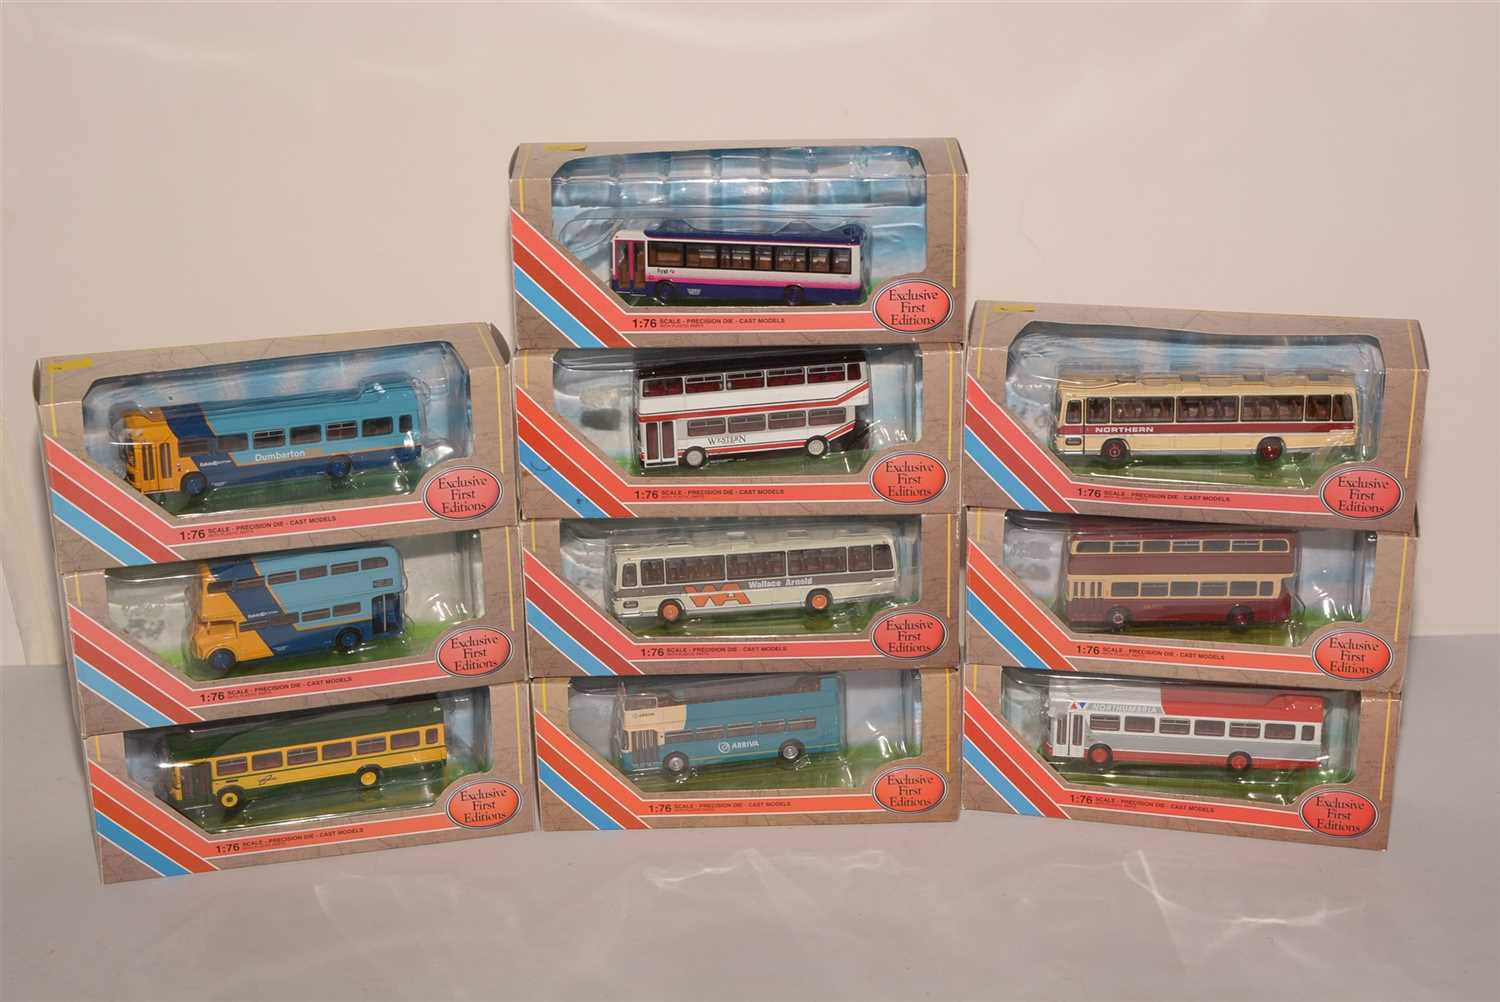 Lot 1338 - Die-cast model buses by Exclusive First Editions.